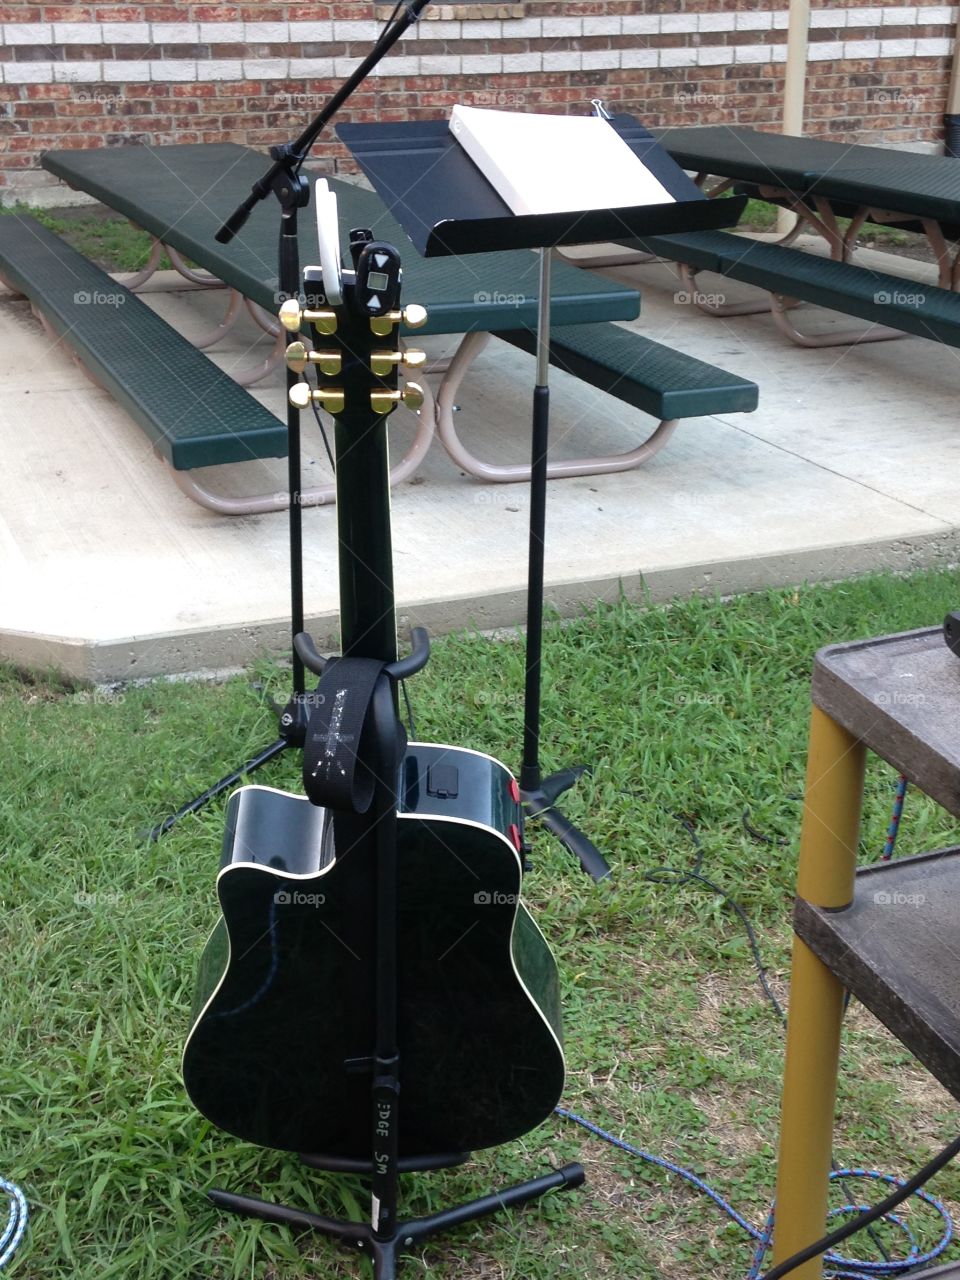 Music is my life. Music practice outside